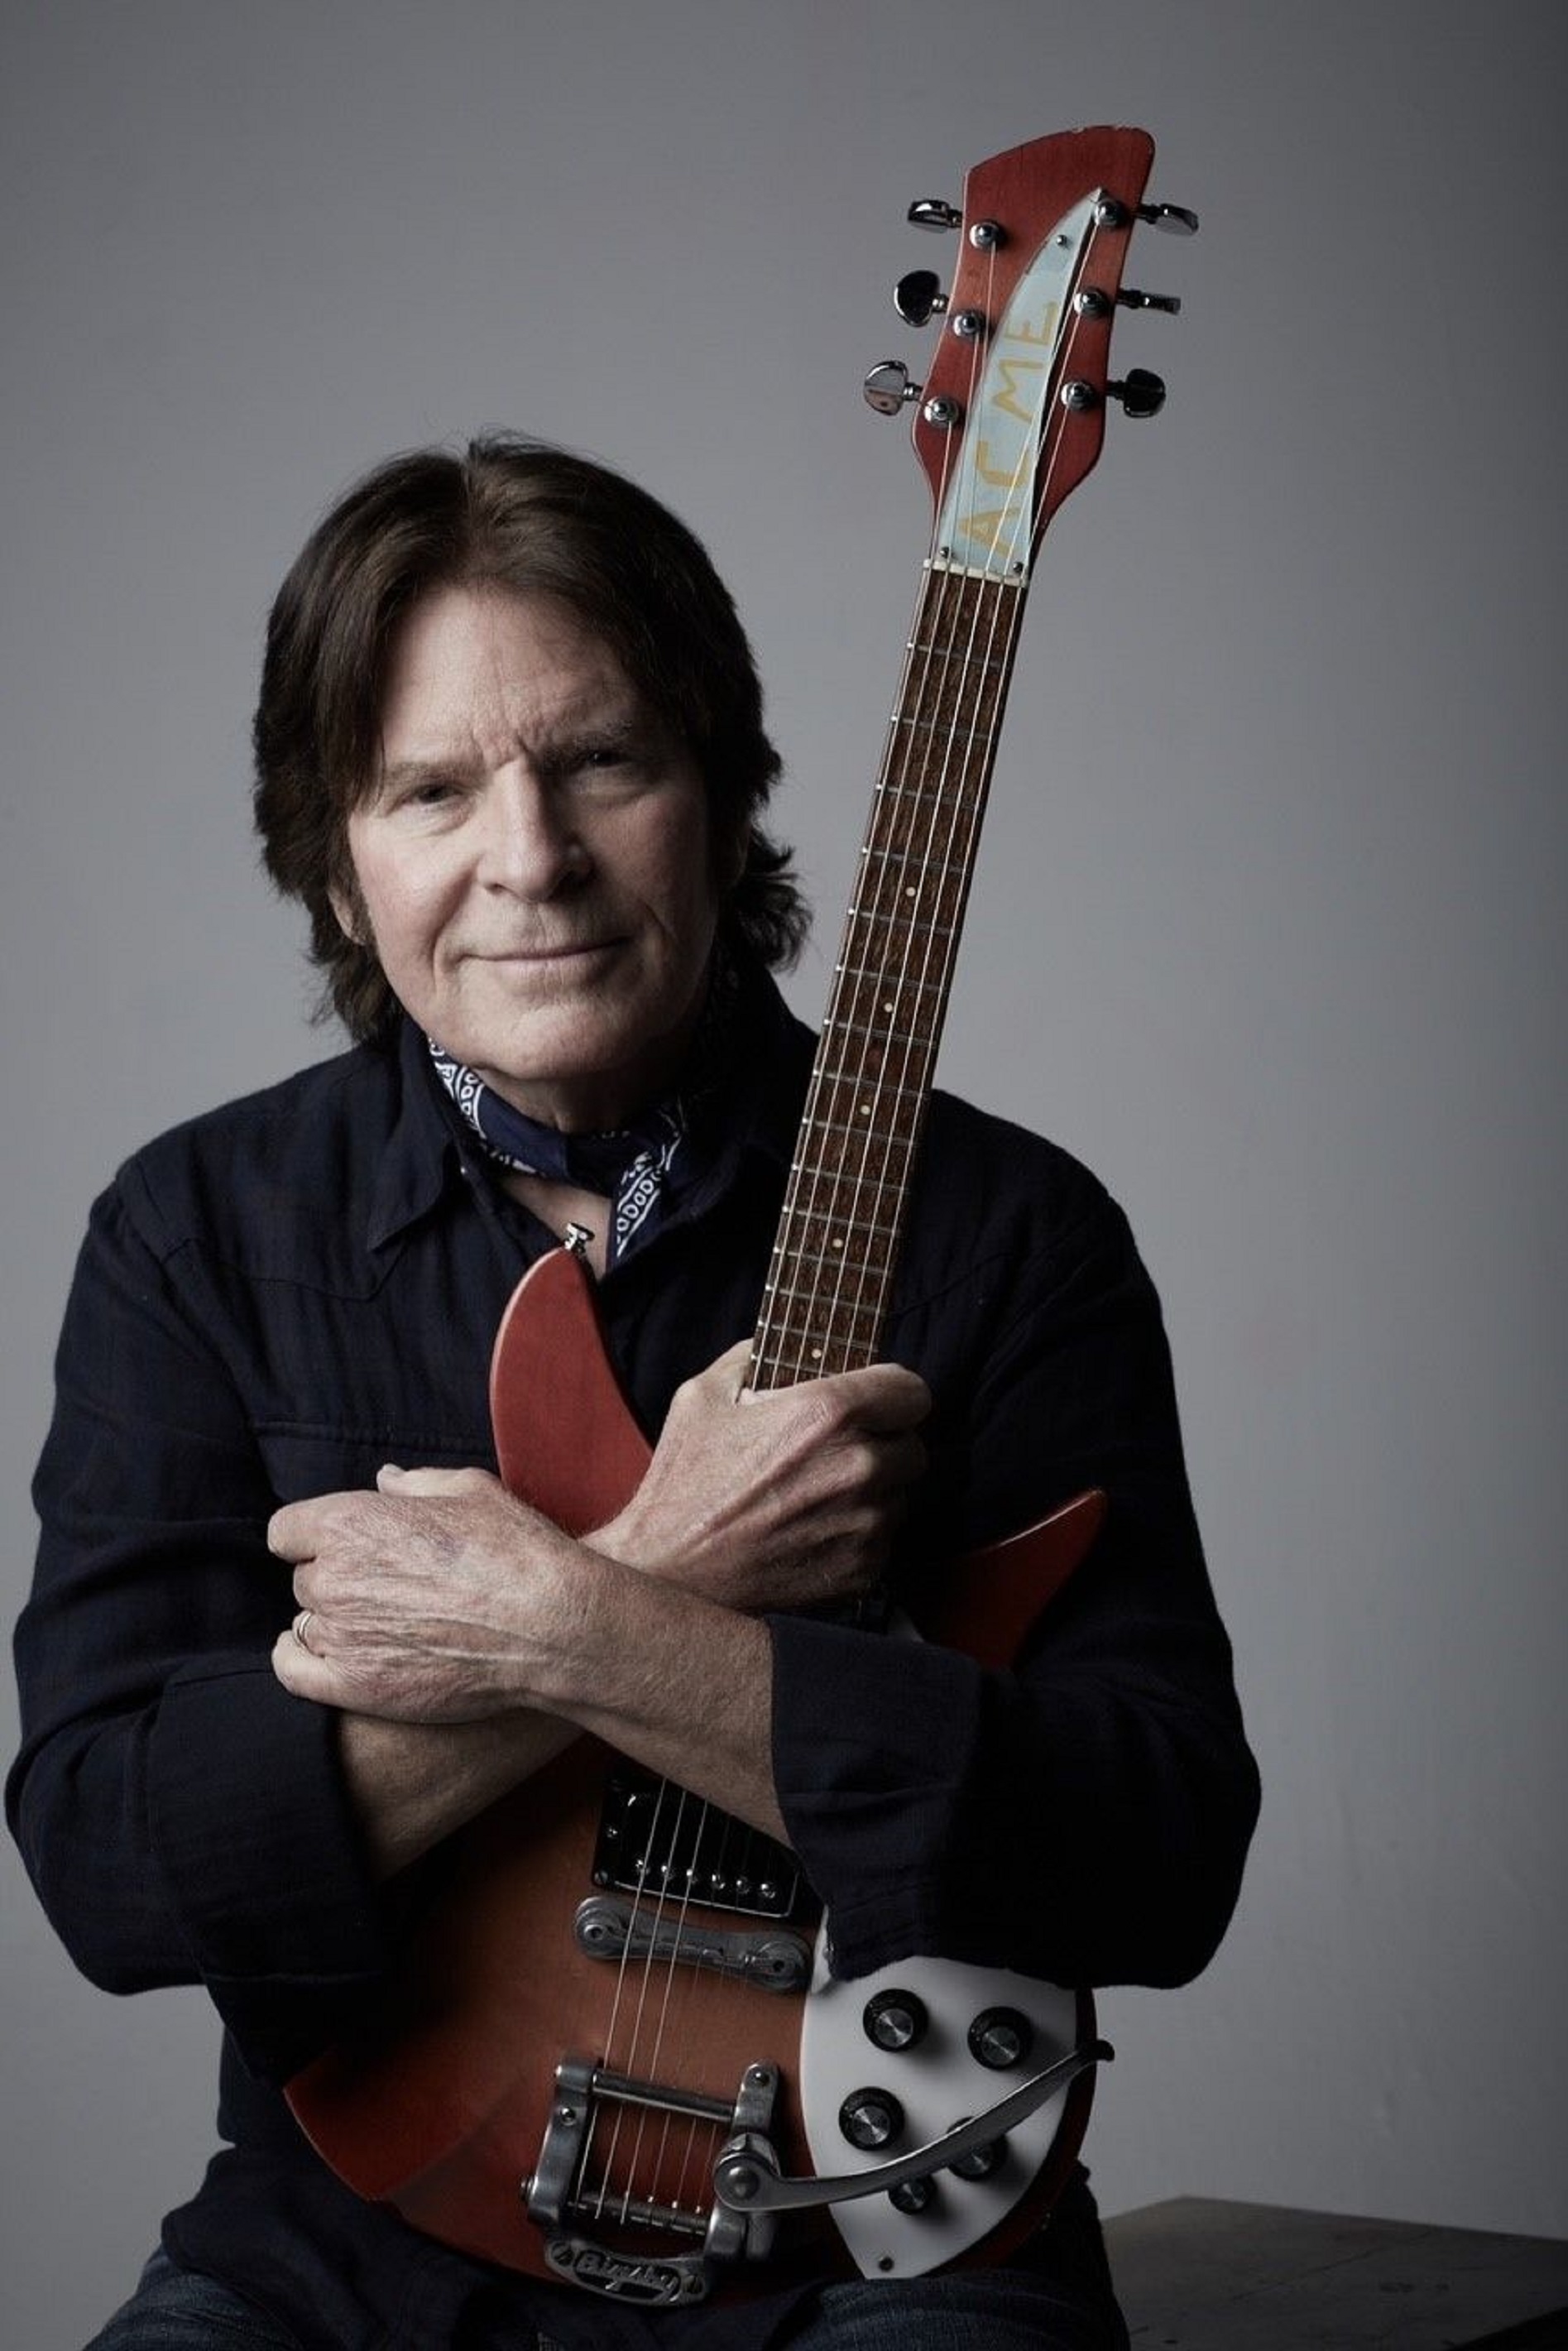 John Fogerty Joins Spotify's Billions Club with "Have You Ever Seen The Rain"